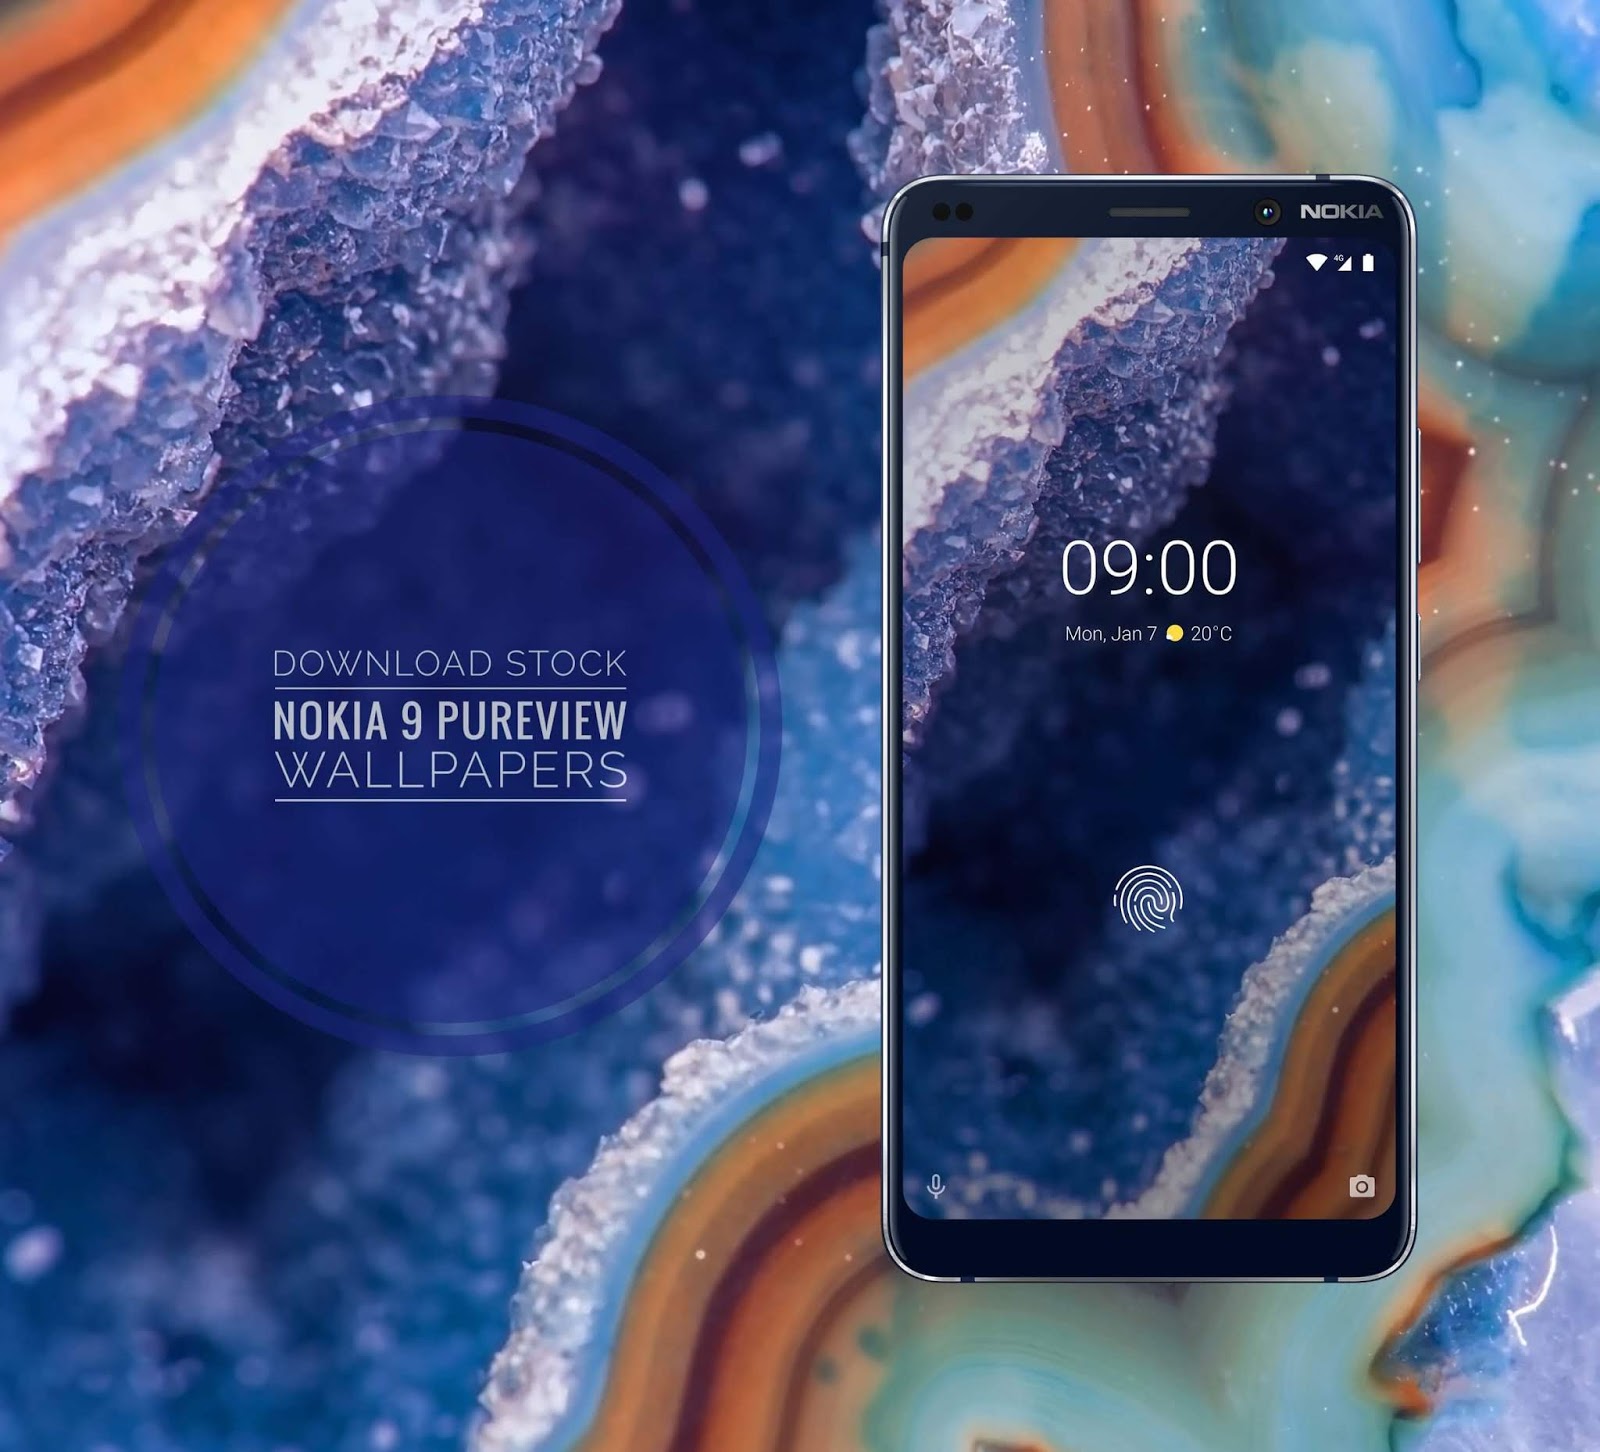 Download all ) Hình nền Nokia 9 PureView stock Wallpapers from here